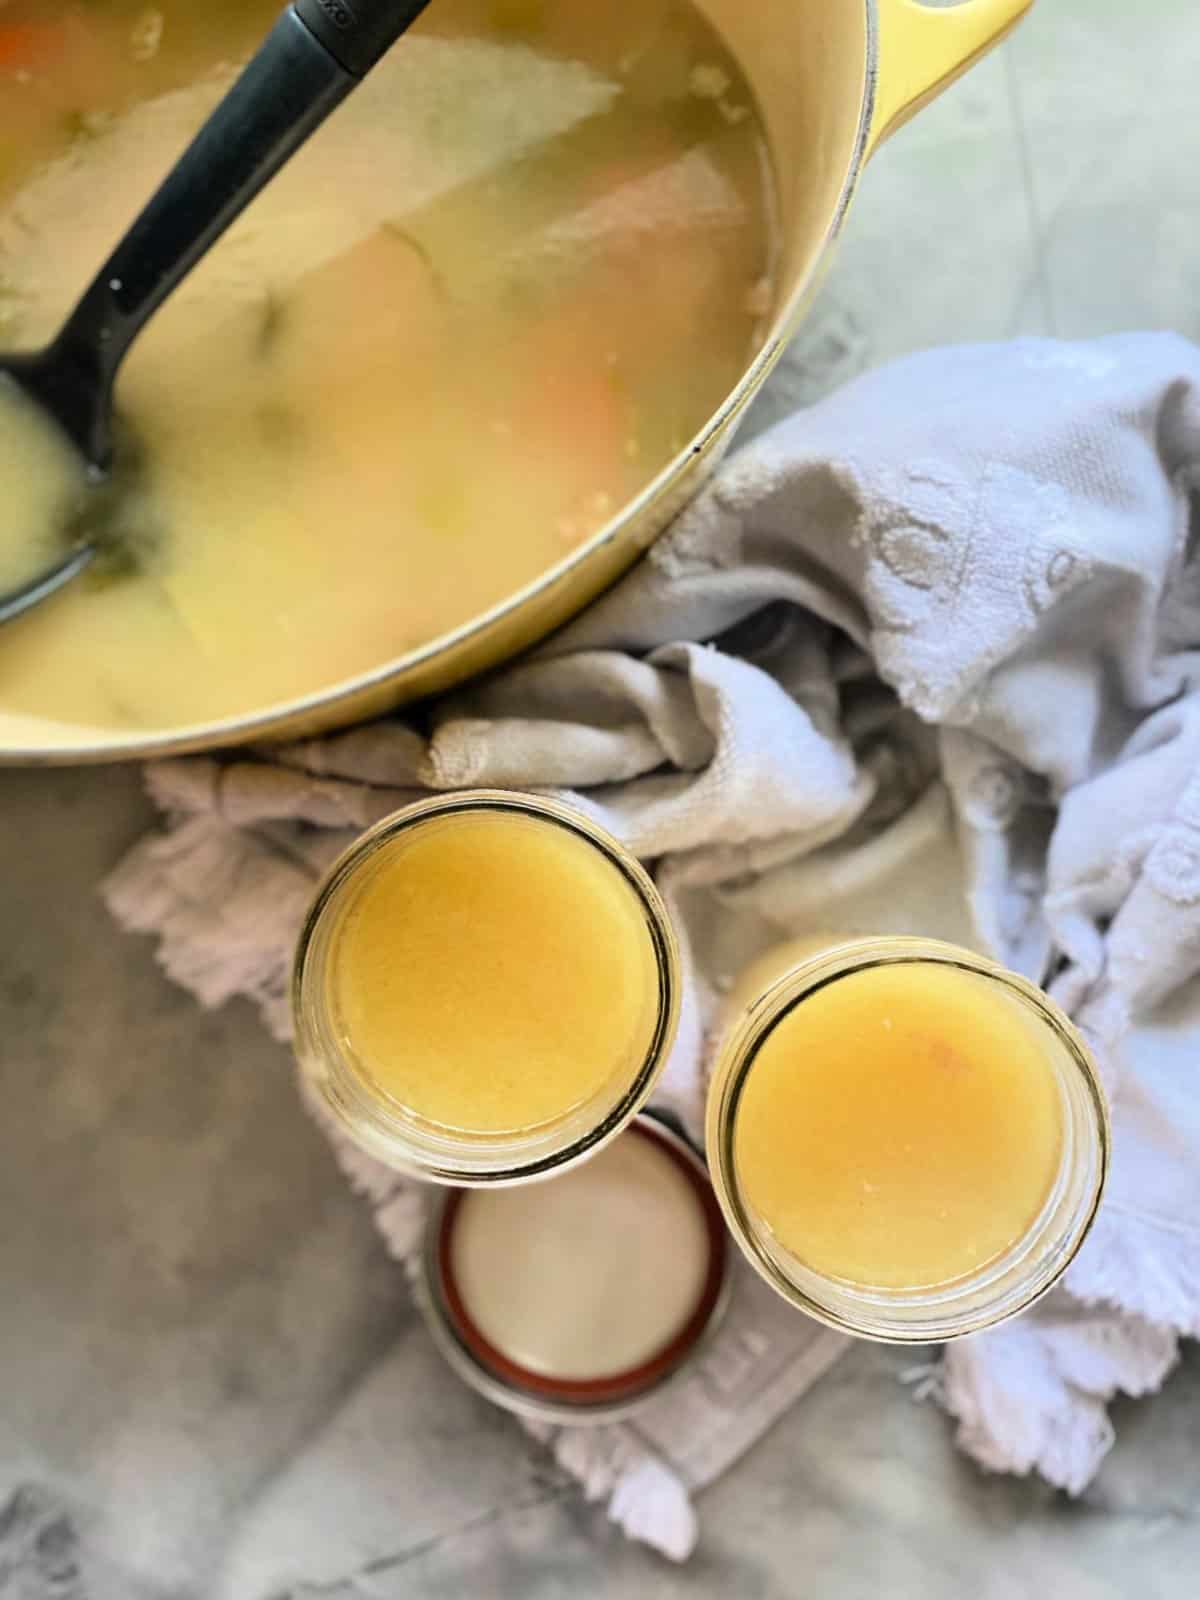 Top view of an oval yellow baking dish with liquid in it and two mason jars filled with yellow liquid.